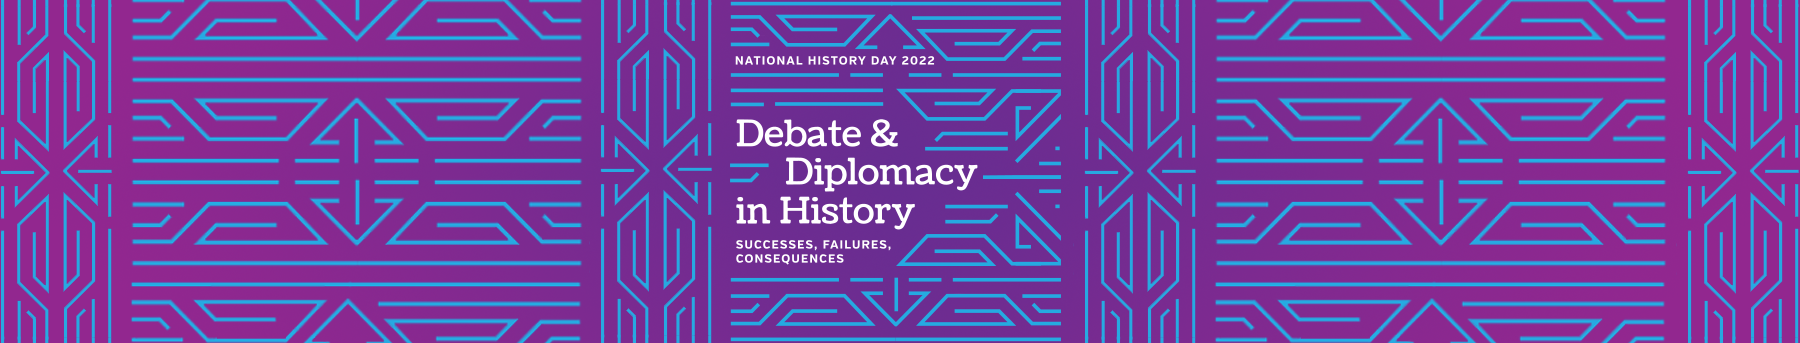 National History Day 2021-22 Theme